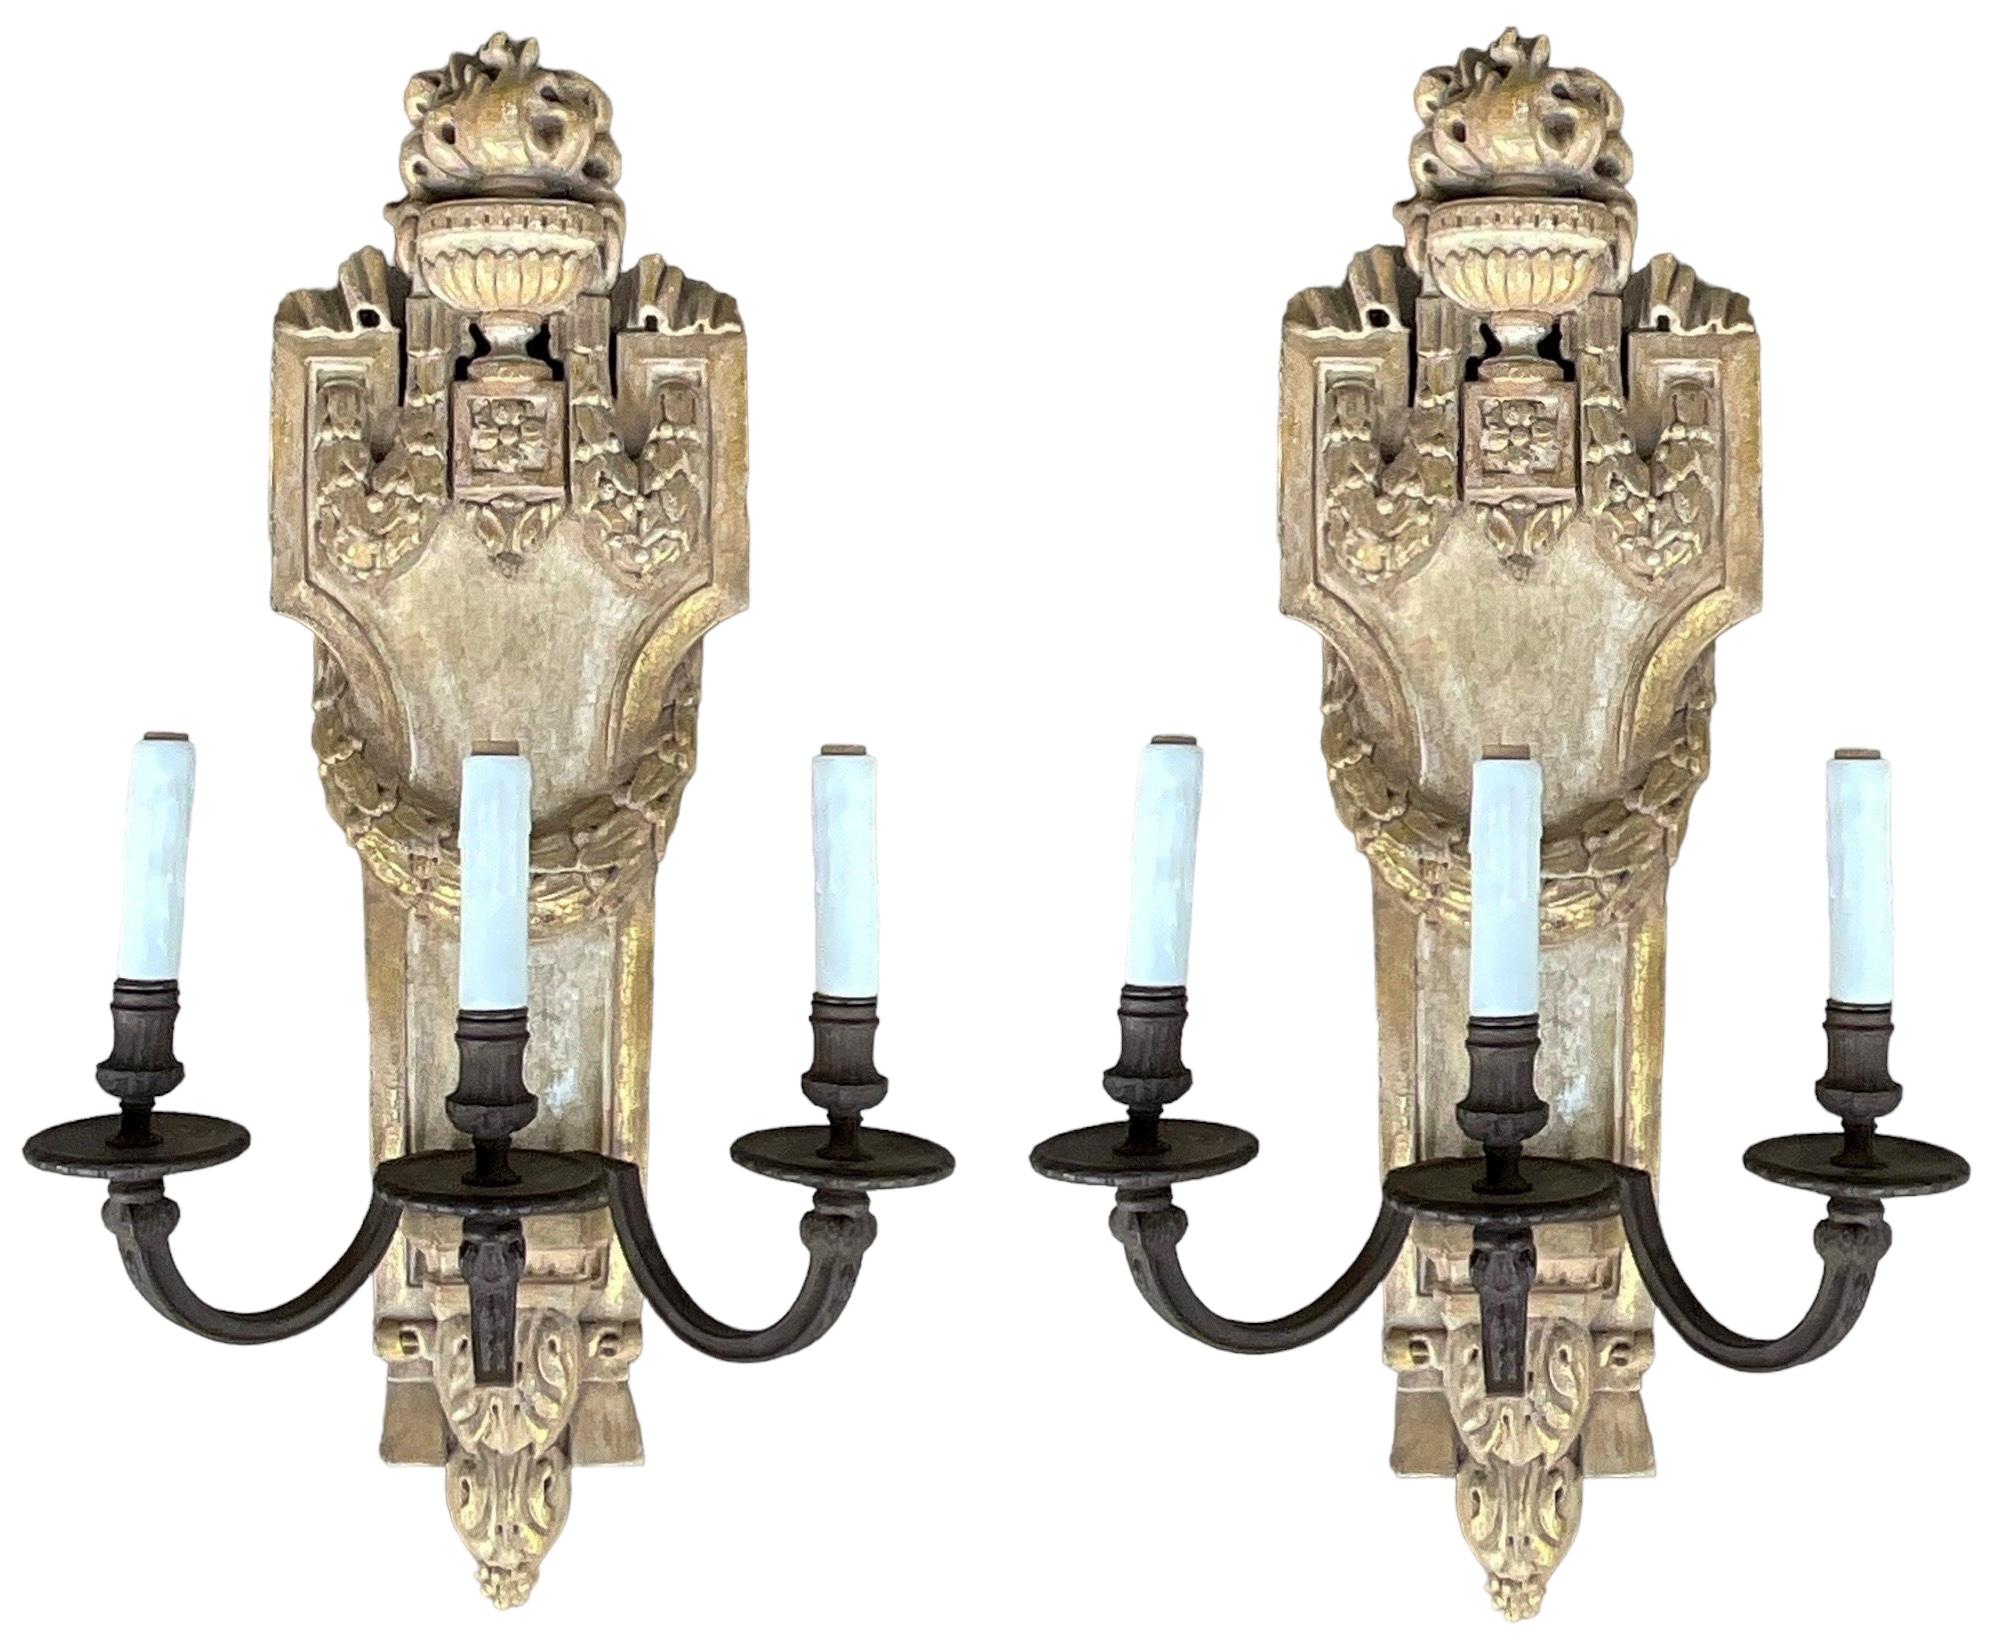 20th Century Neo-Classical Style Carved Wood Sconces W/ Urns & Draping Laurel Garland -Pair  For Sale